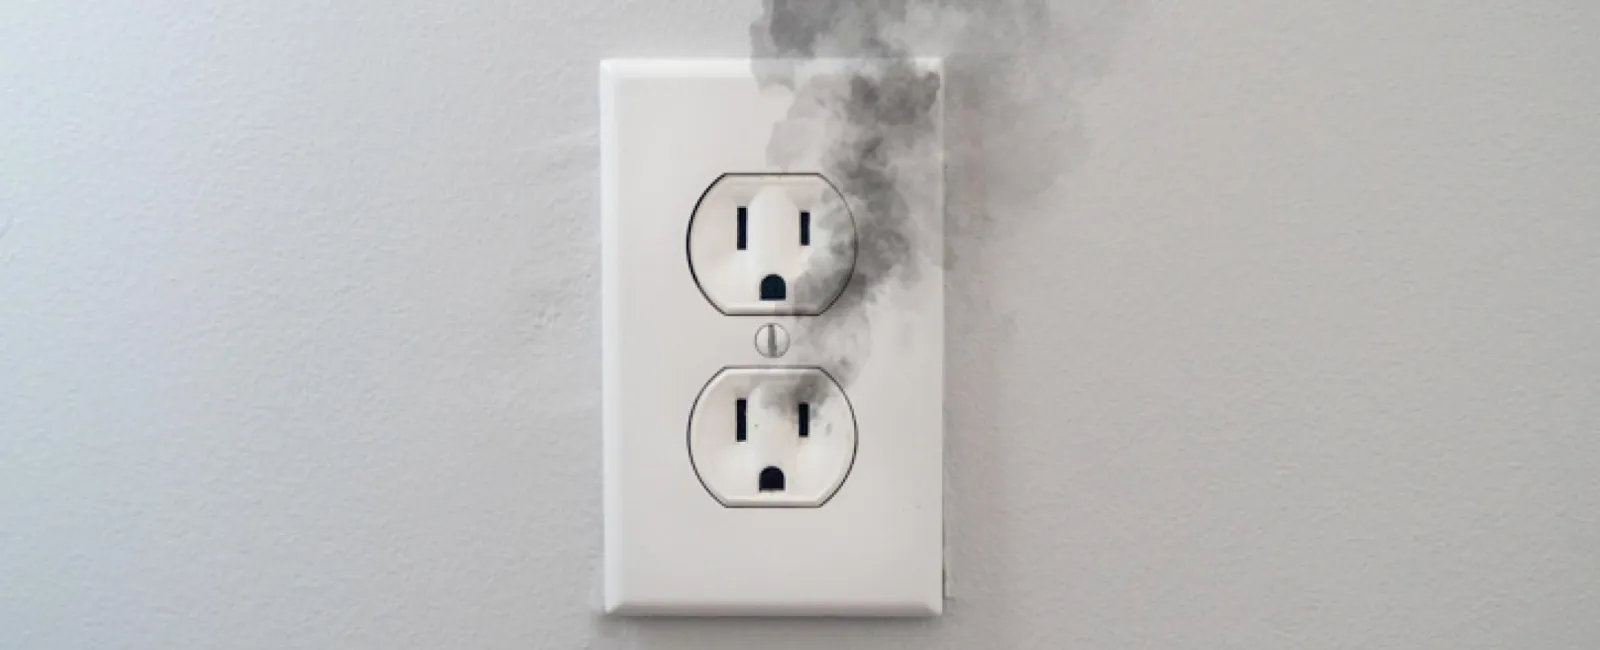 How to Put Out an Electrical Fire.